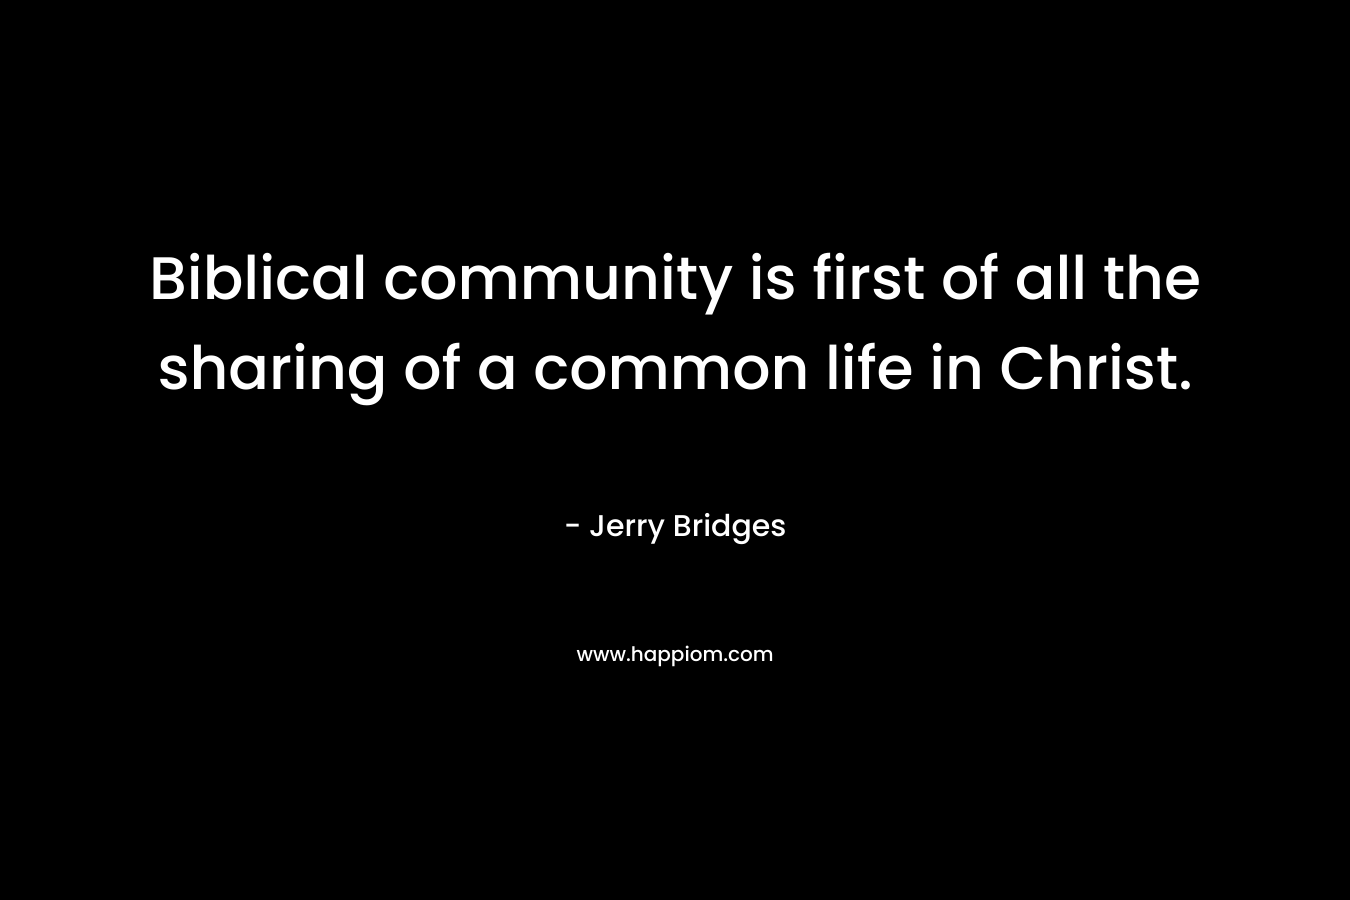 Biblical community is first of all the sharing of a common life in Christ. – Jerry Bridges